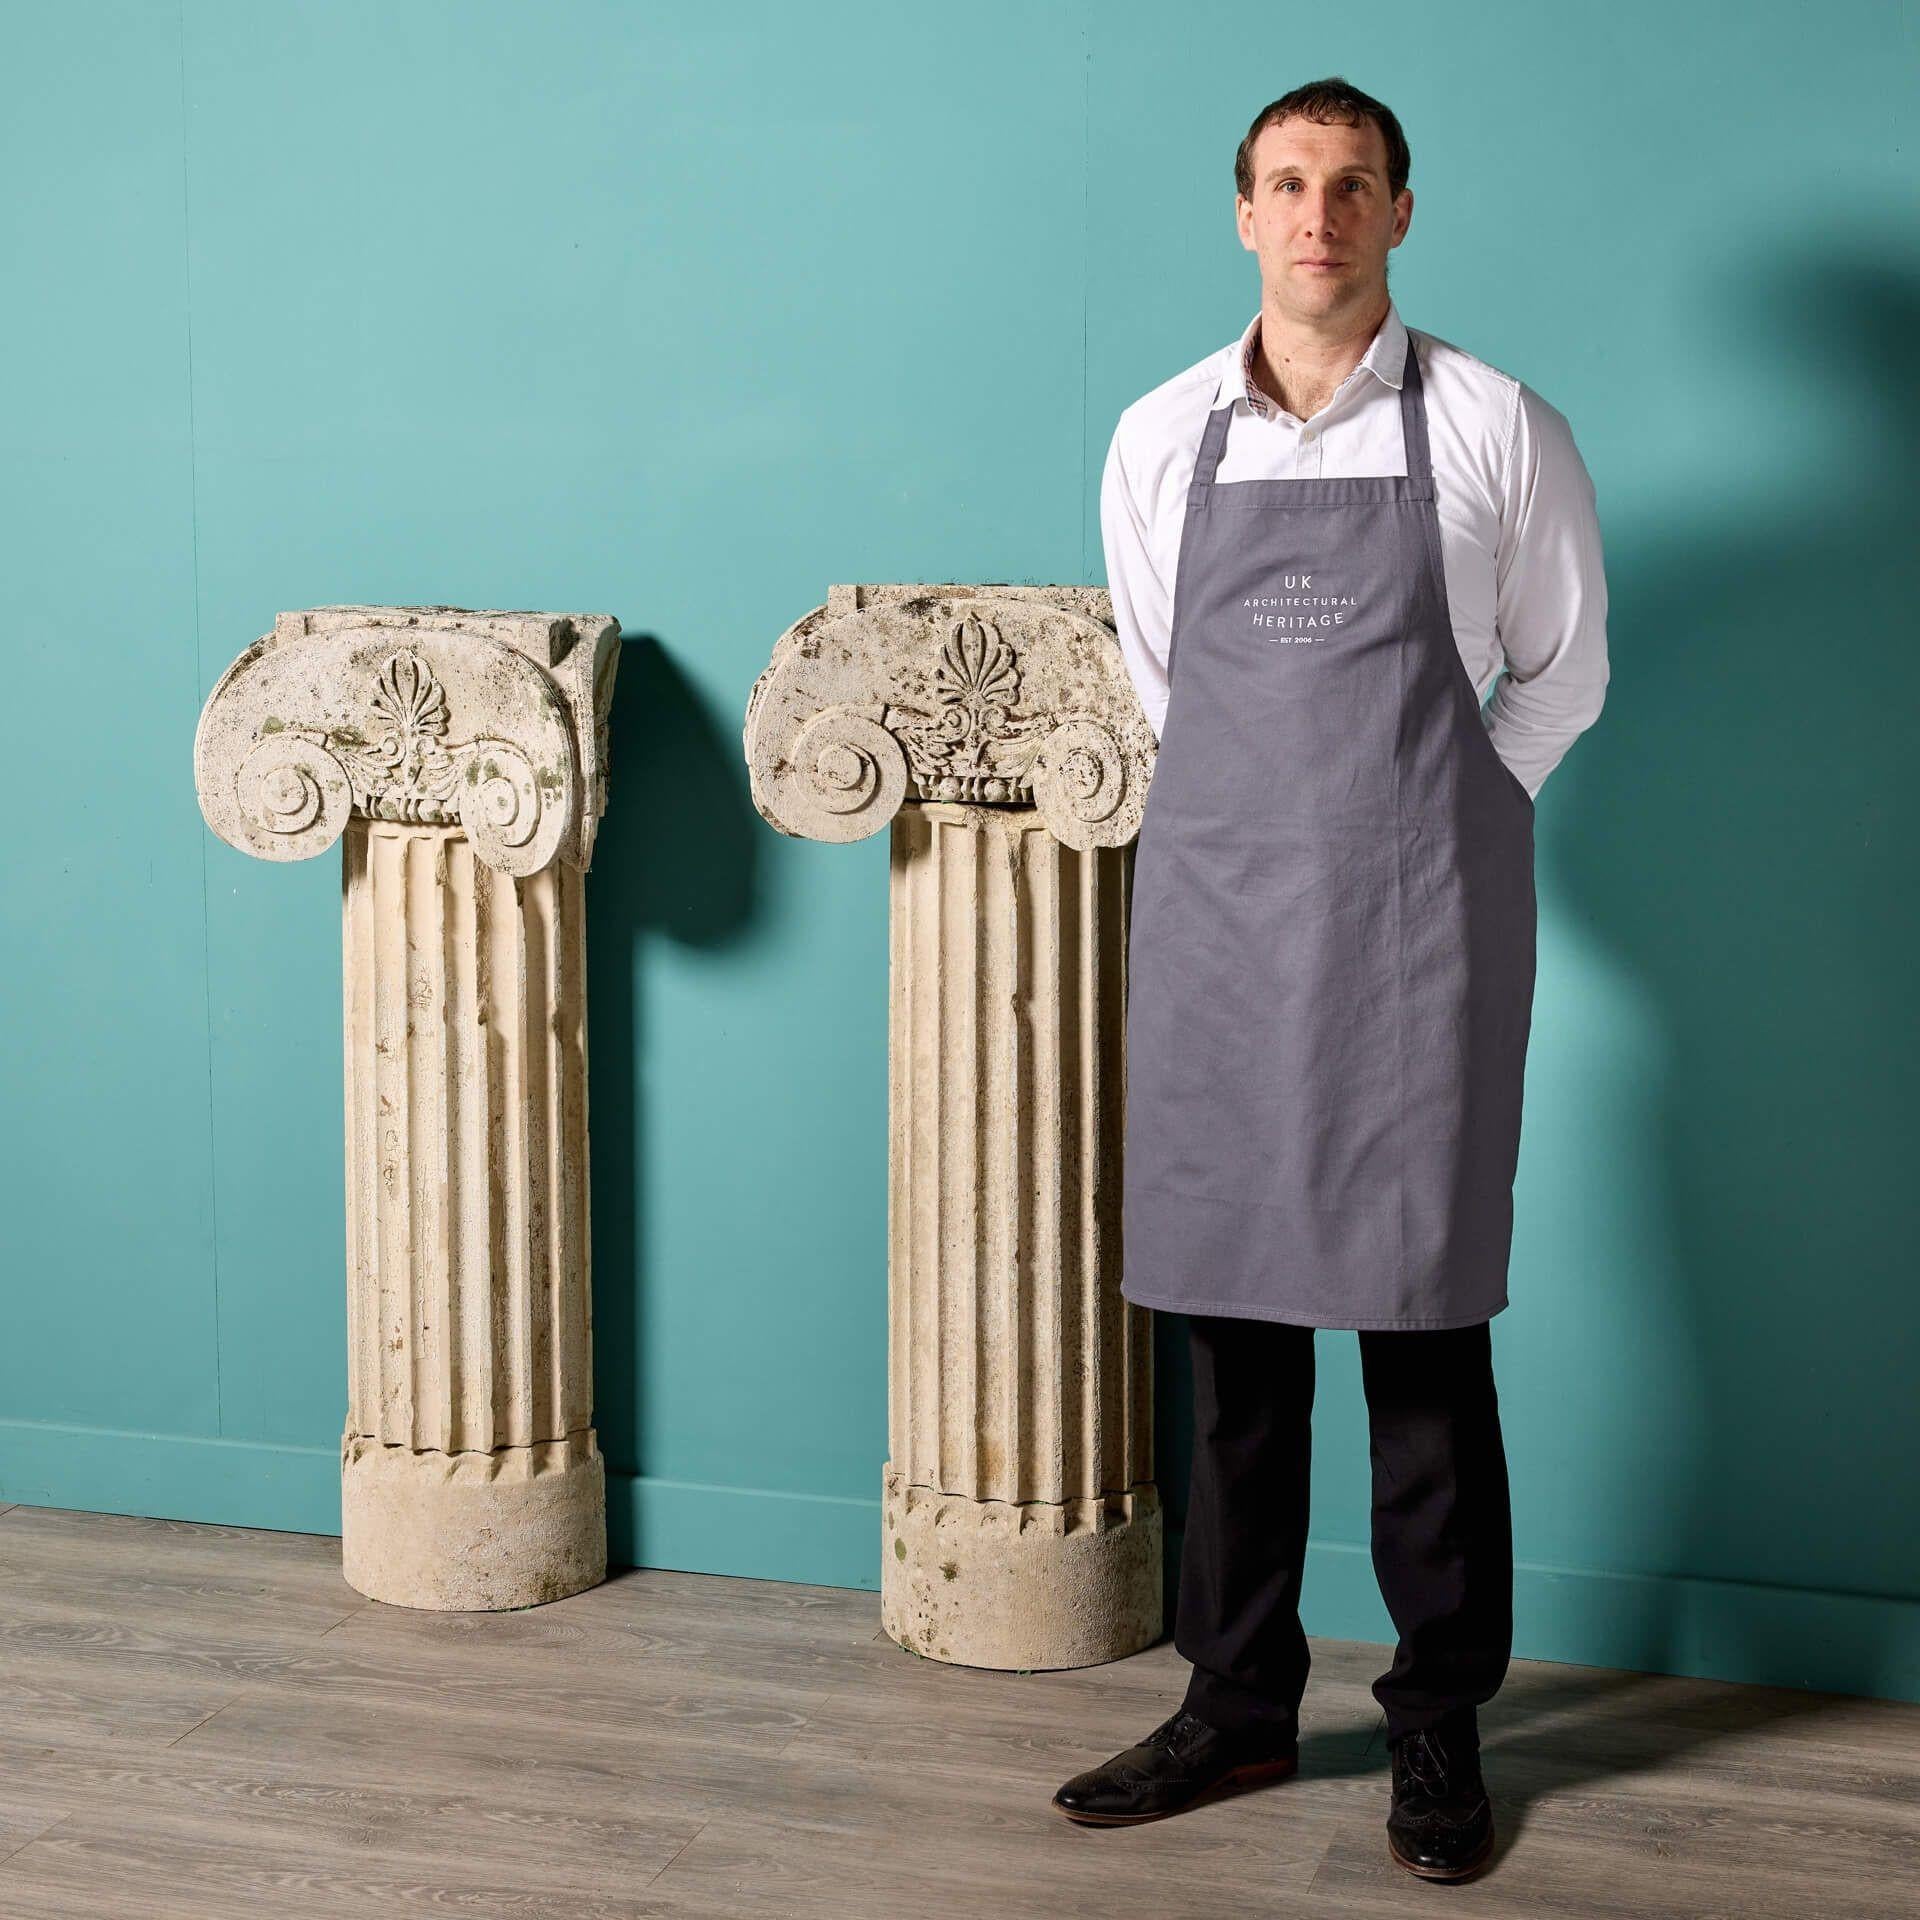 A striking set of 2 English antique Portland limestone ionic column pedestals dating to circa 1800. Suitable for use as display plinths or simply architectural features, these 220-year-old late Georgian Greek style stone columns are evocative of the